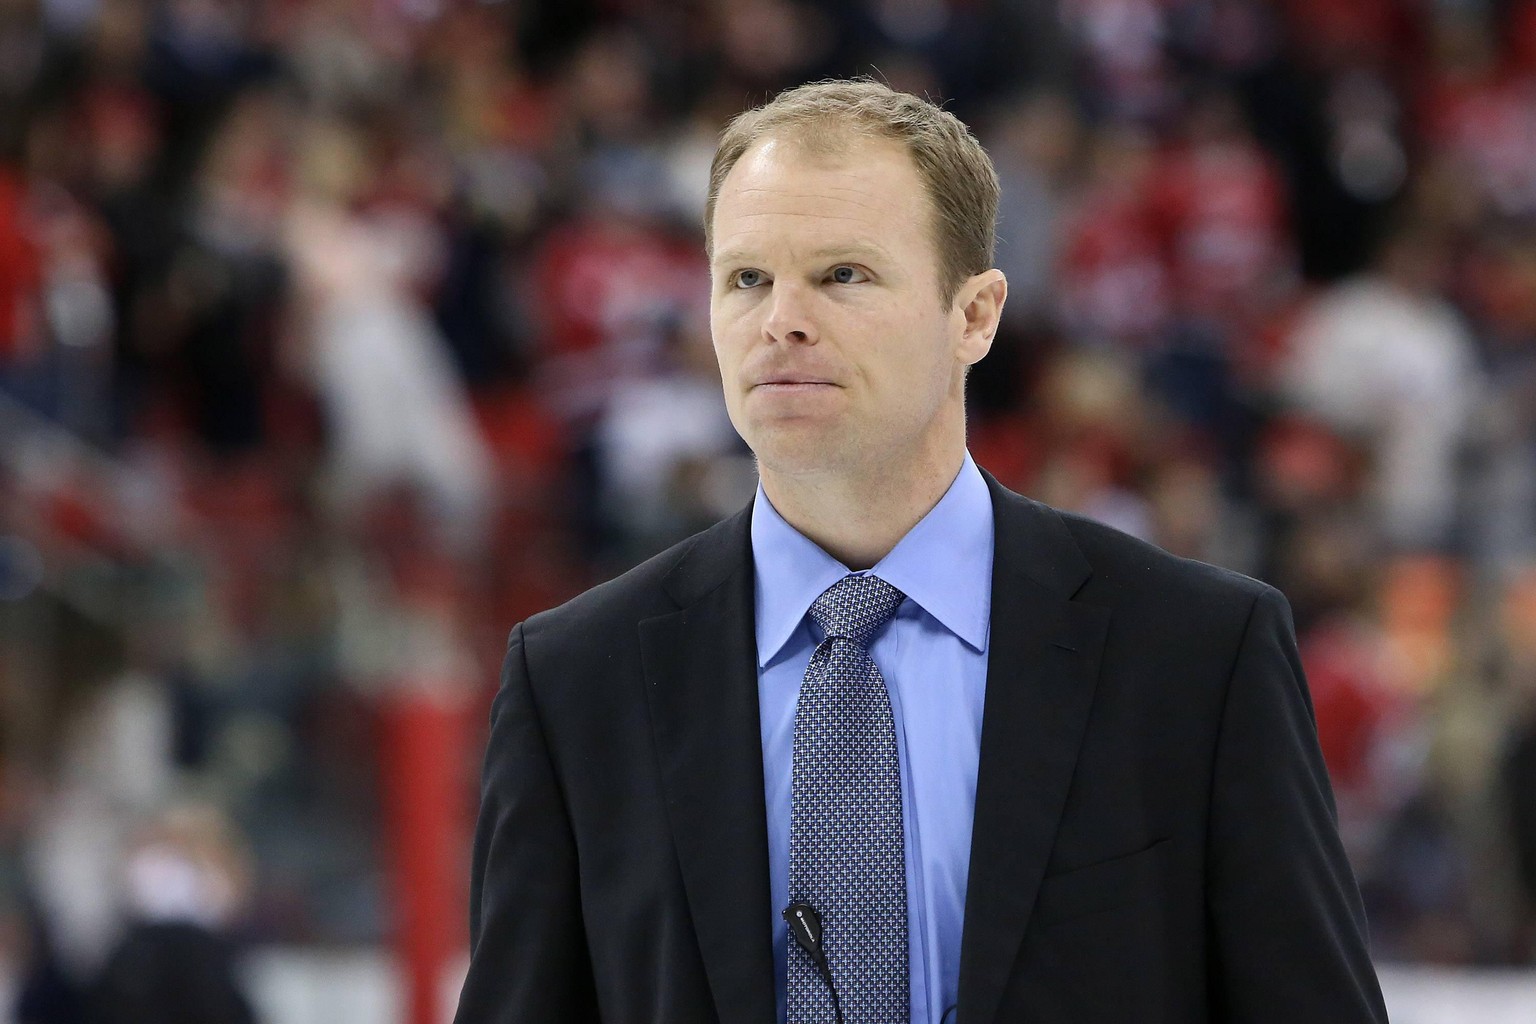 Bildnummer: 12964812 Datum: 05.03.2013 Copyright: imago/Icon SMI
05 March 2013: Buffalo assistant coach Kevyn Adams. The Carolina Hurricanes played the Buffalo Sabres at the PNC Arena in Raleigh, Nort ...